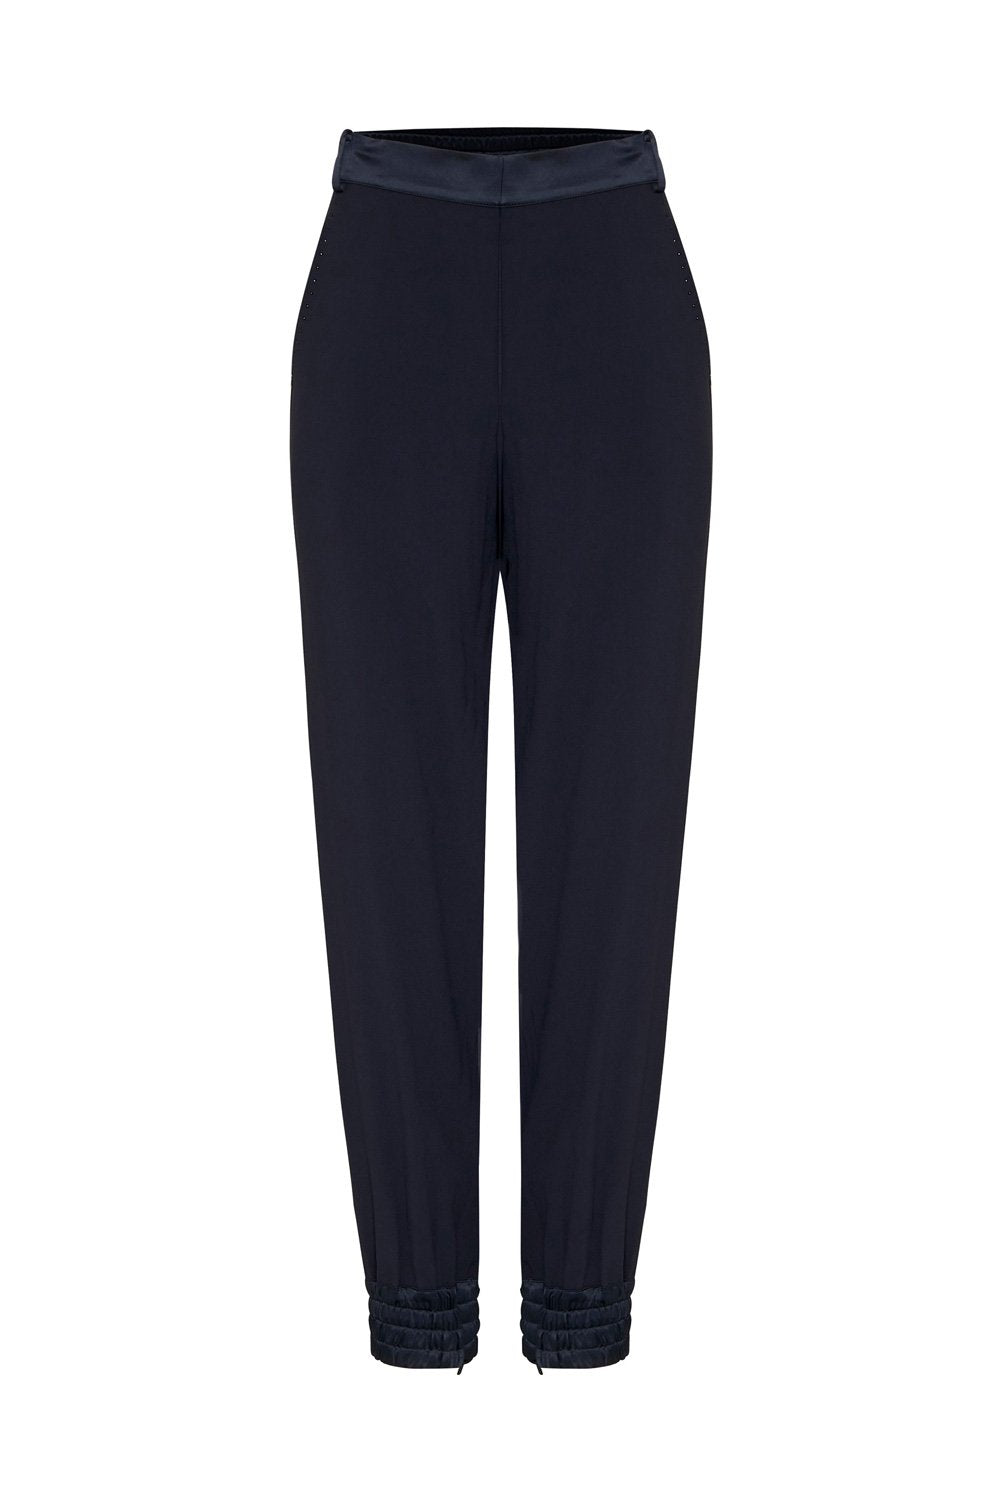 JOGGER WITH ENCASED ELASTIC CUFF SOLID NAVY